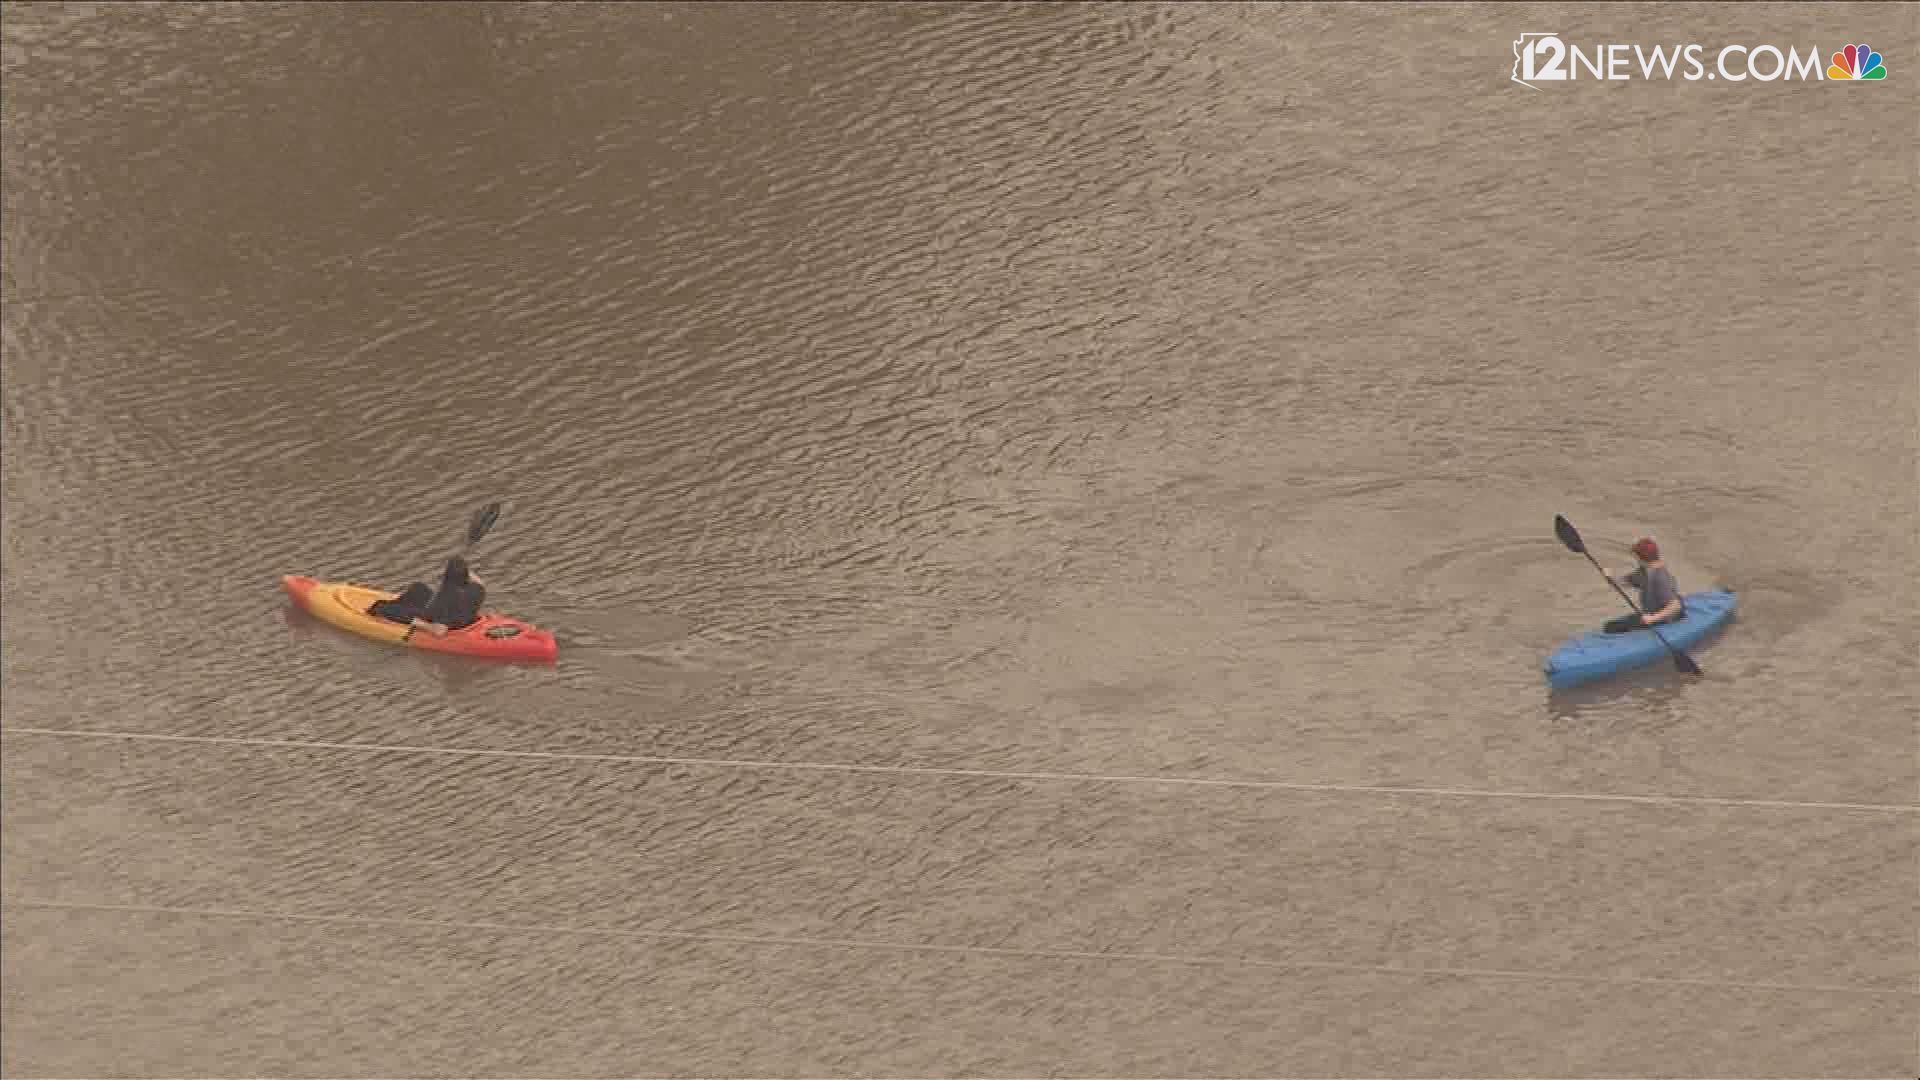 Sky 12 captured people kayaking through floodwaters Monday morning. The storm is not a monsoon storm but an offshoot of a tropical storm.